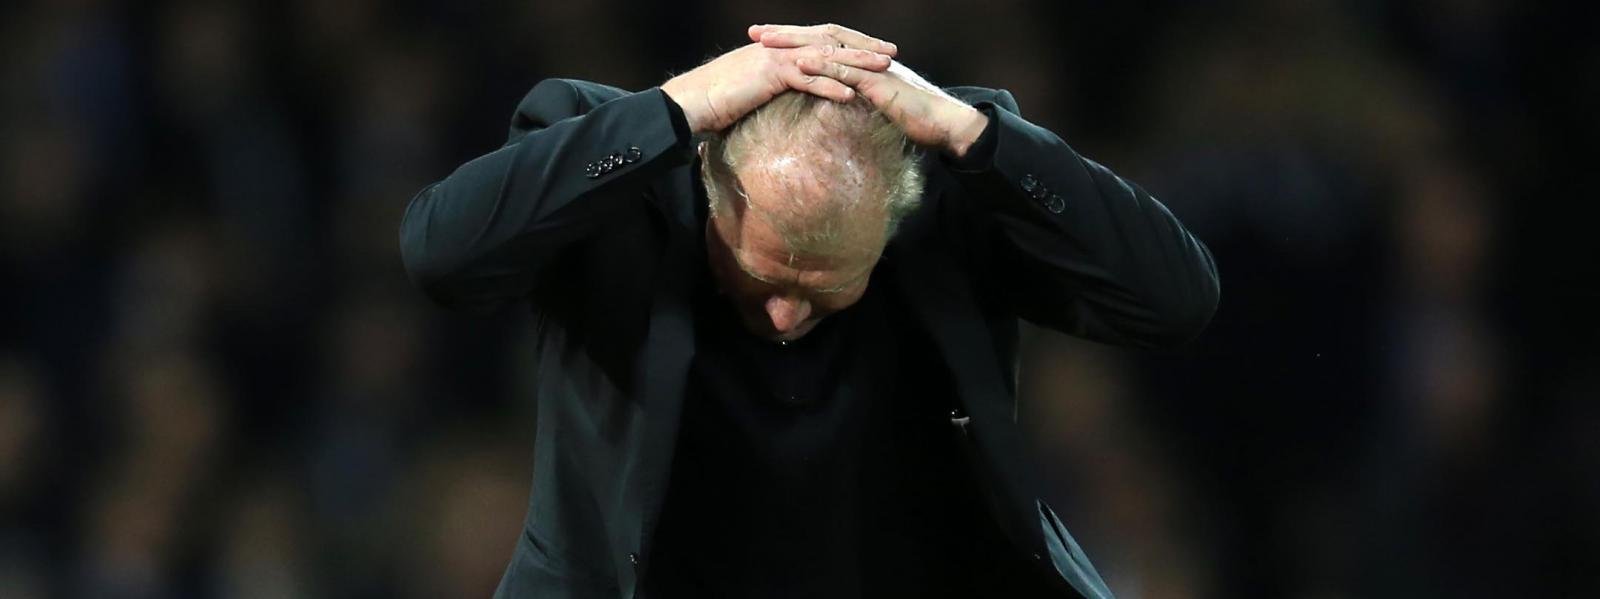 If McClaren can’t inspire these players to fight for survival, this isn’t the job for him